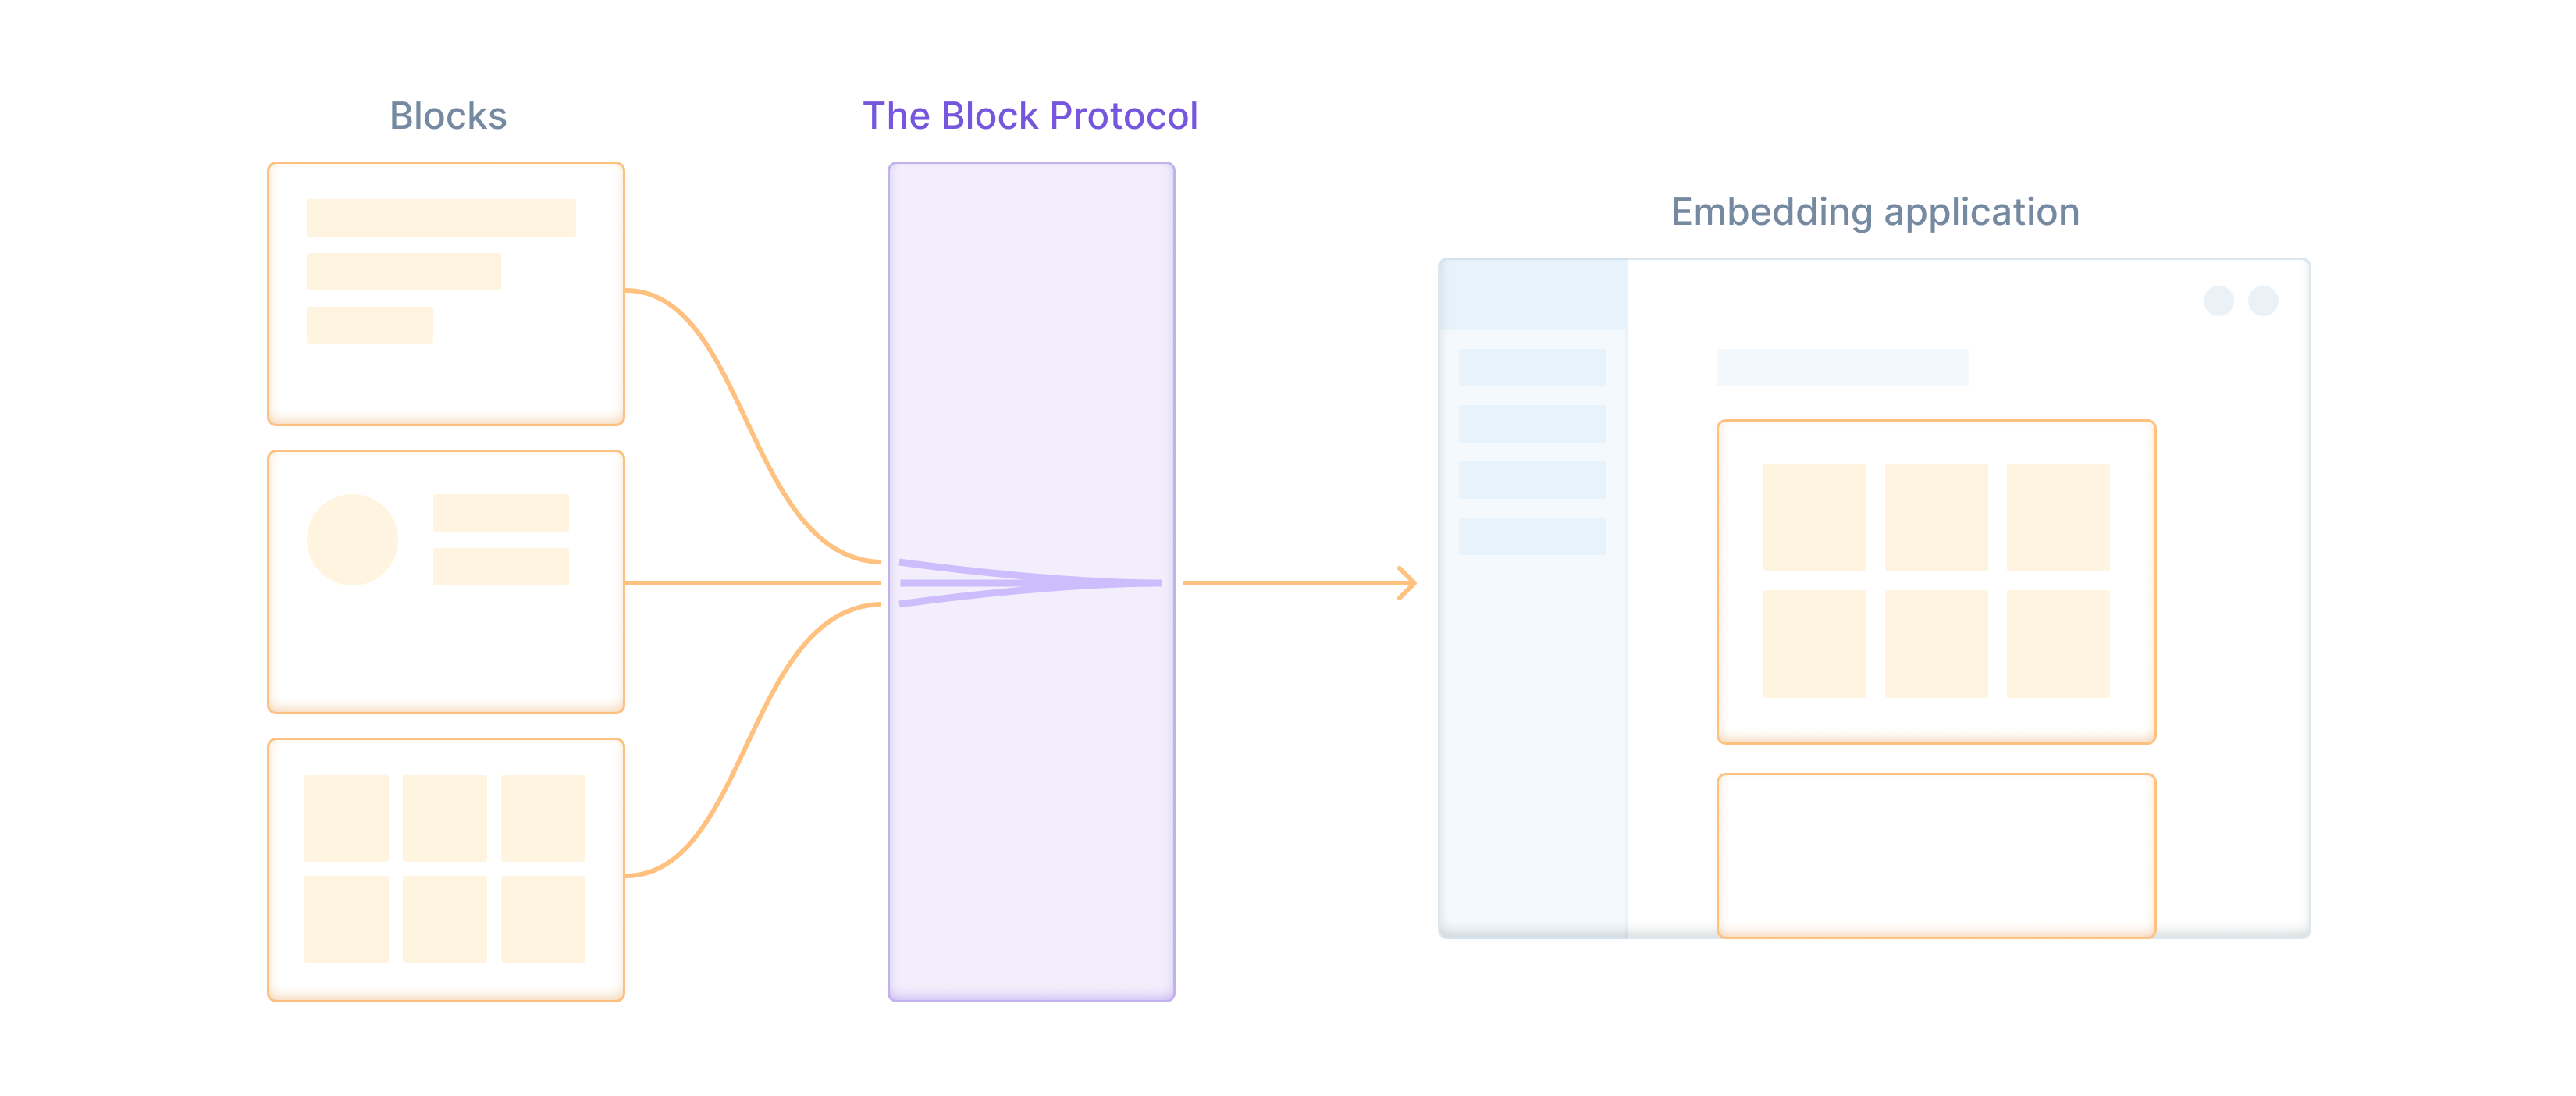 A diagram of a set of blocks connected through the Block Protocol to an embedding application on the other side